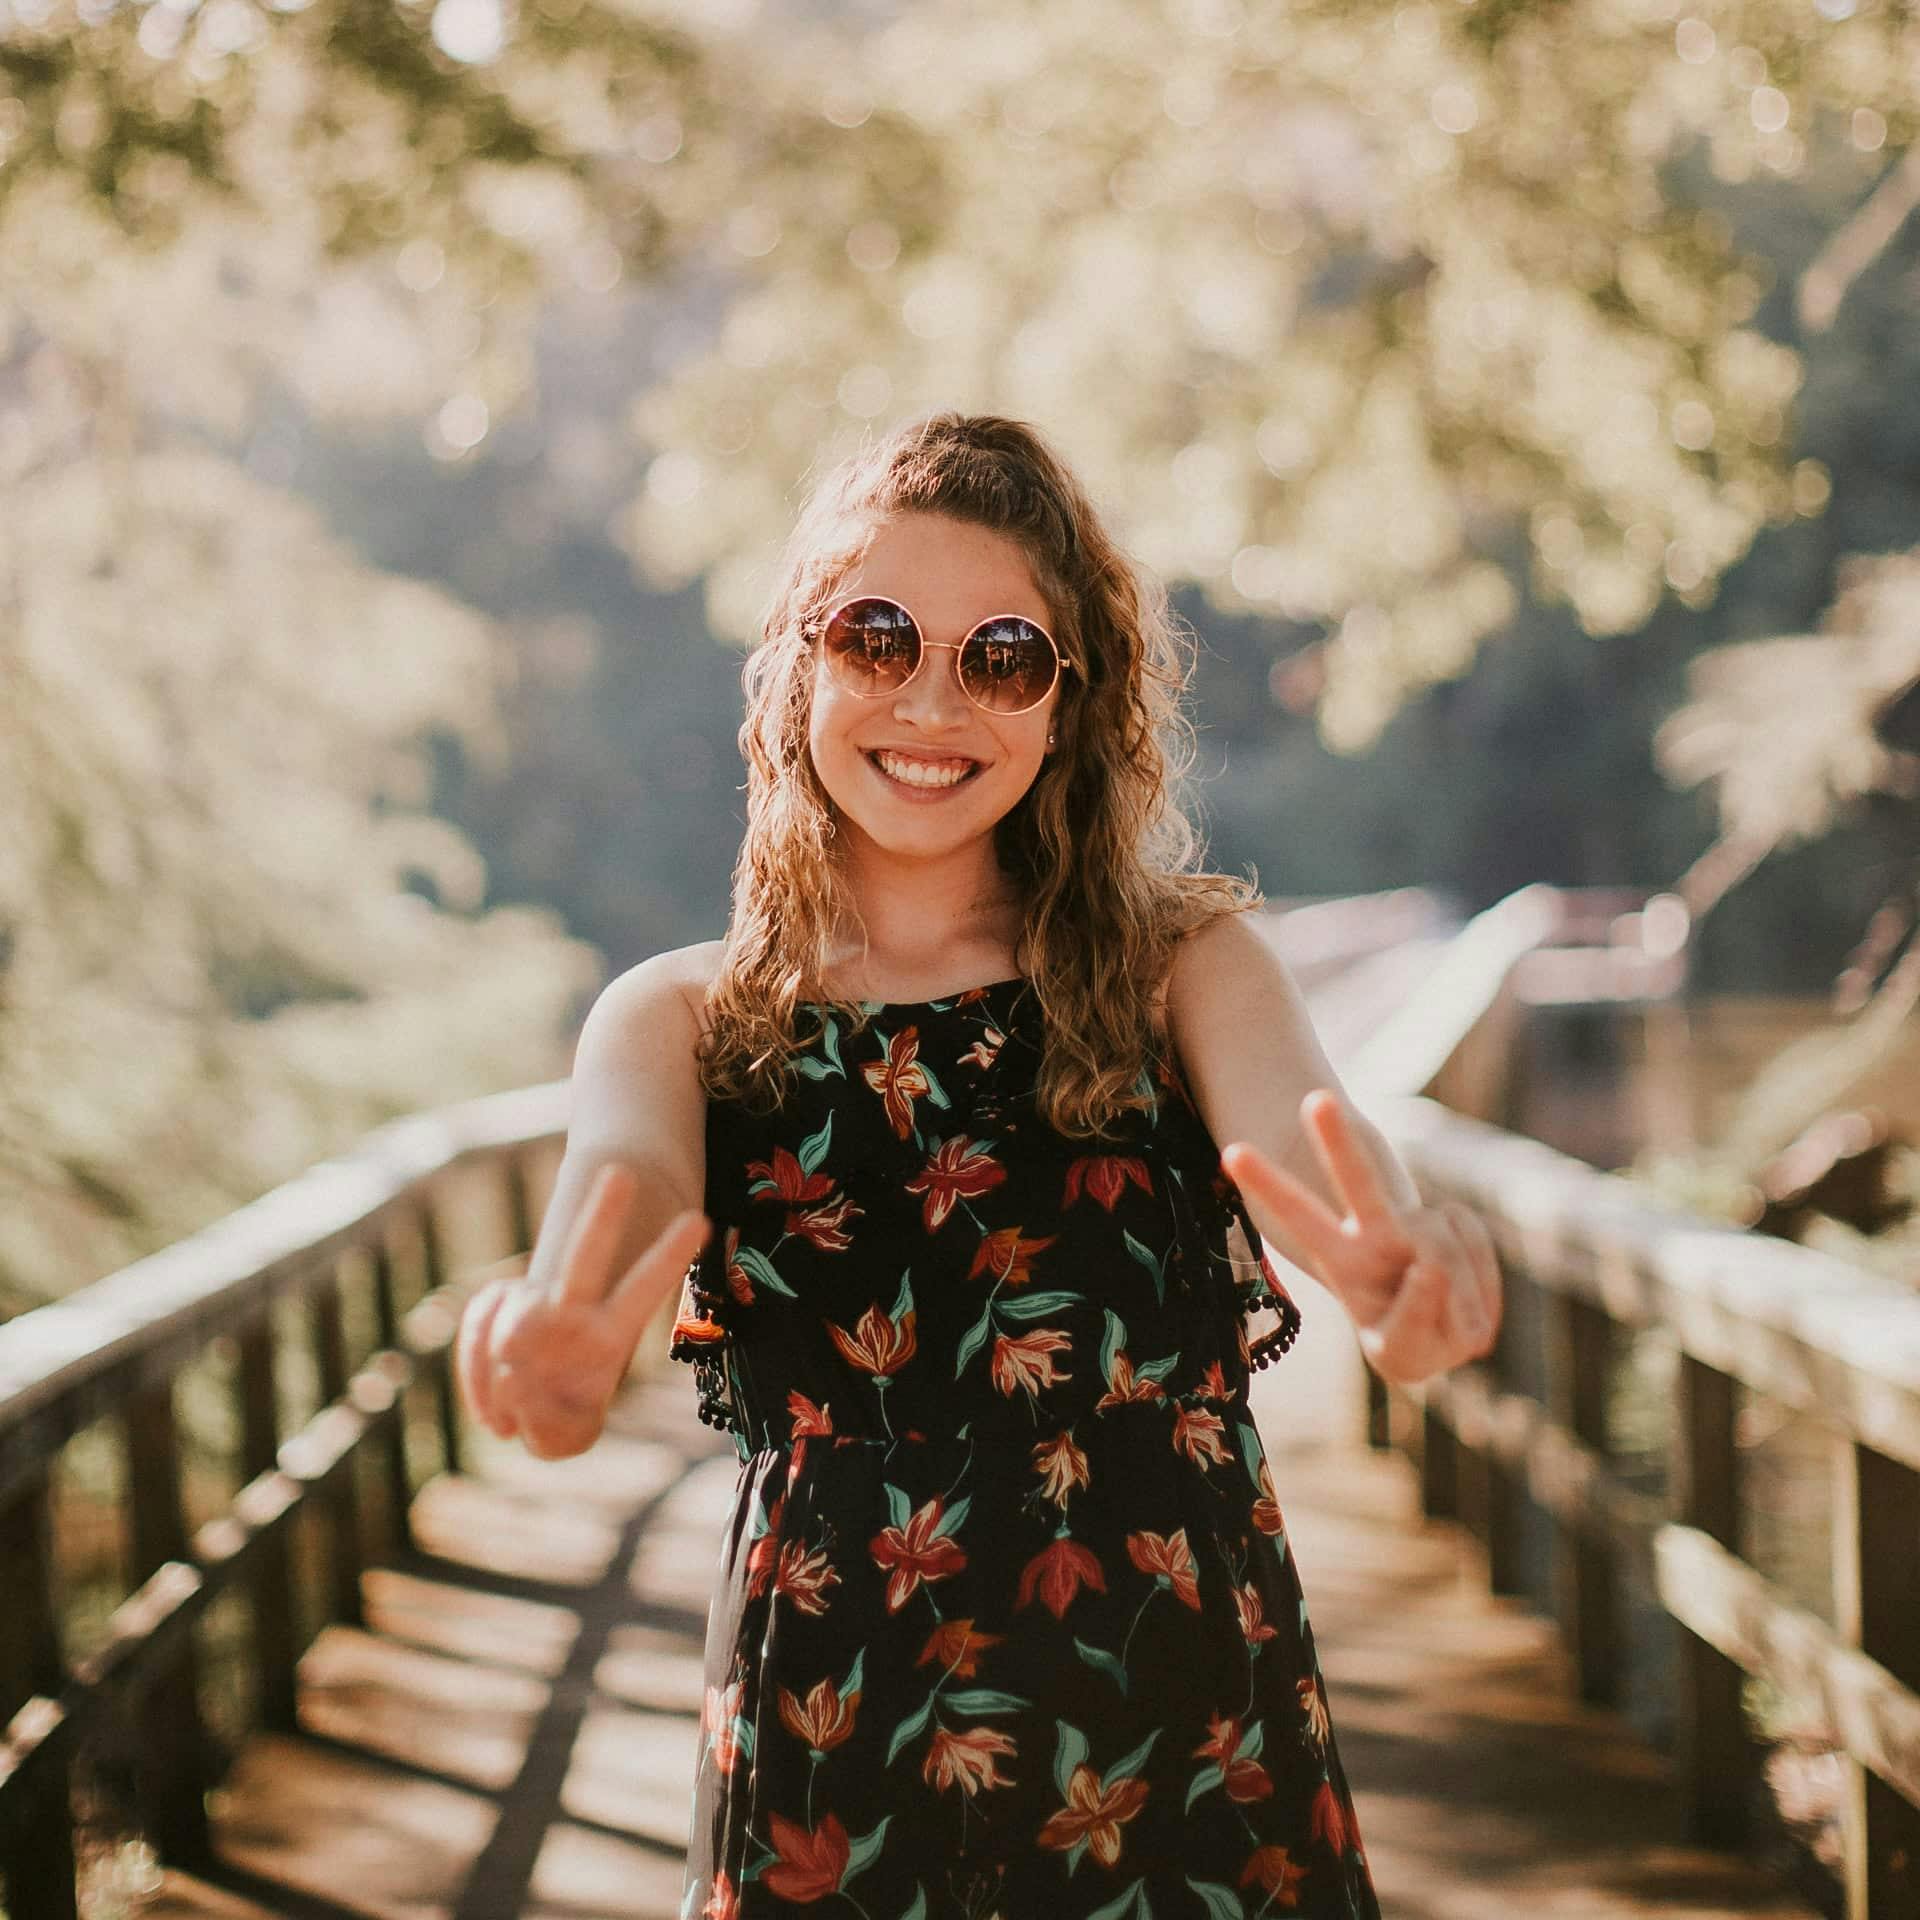 Girl giving two peace signs while standing on bridge.